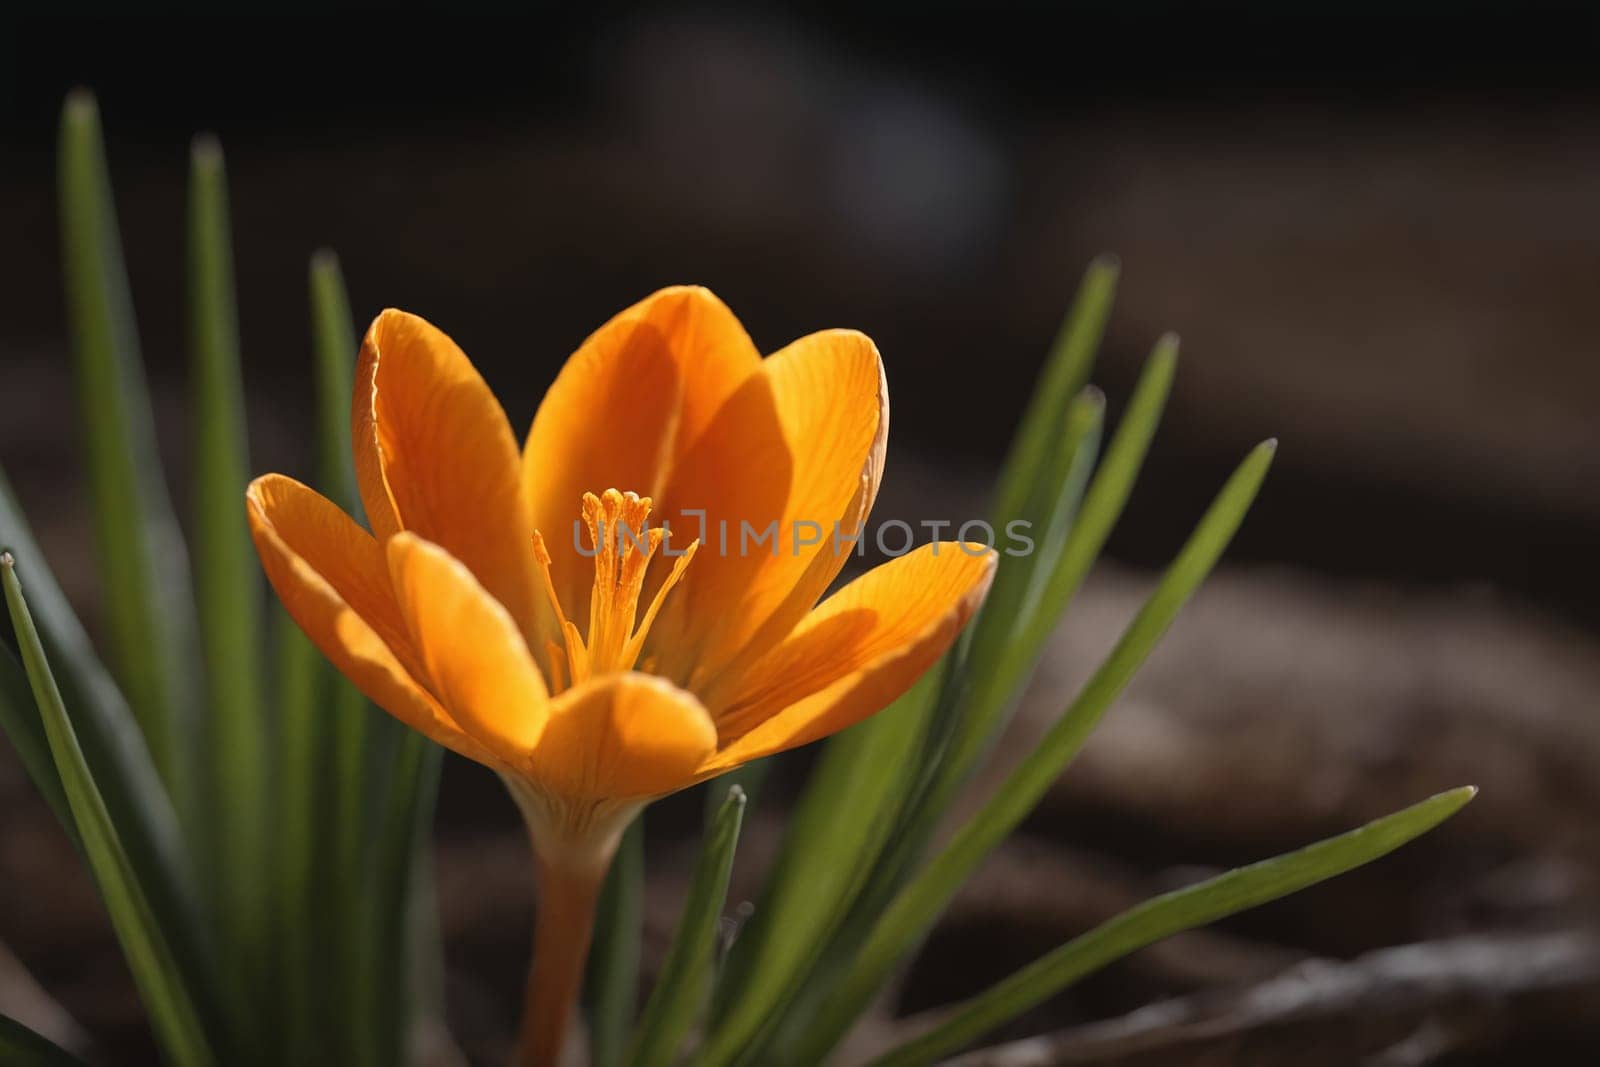 Brilliant Colors: A Close-up View of a Vibrant Crocus. by Andre1ns